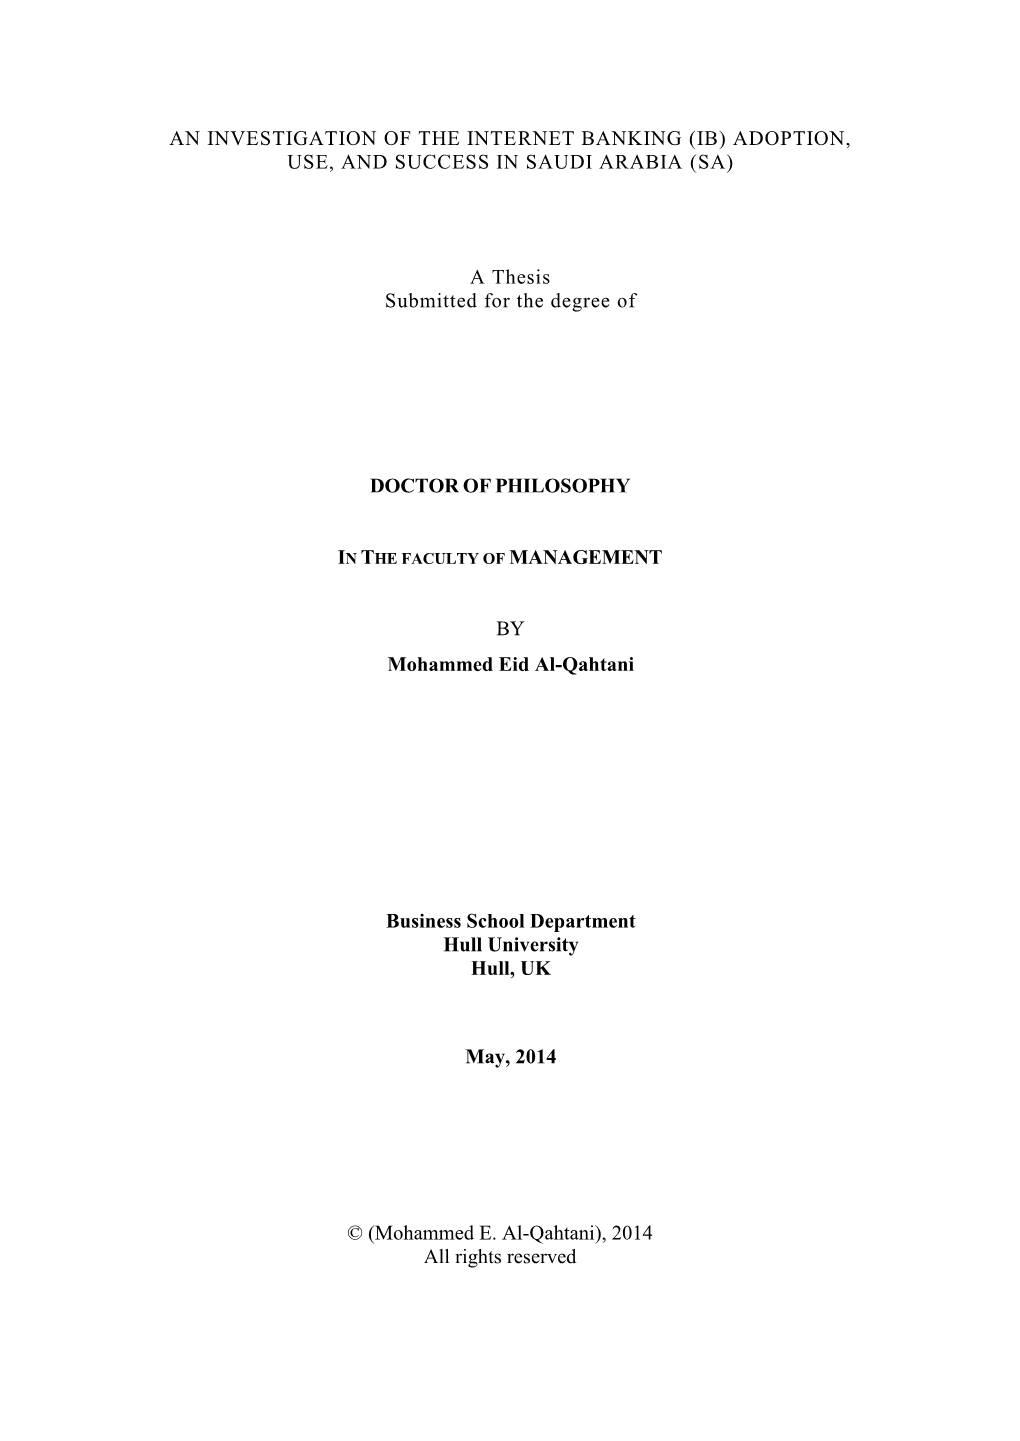 Thesis Submitted for the Degree Of